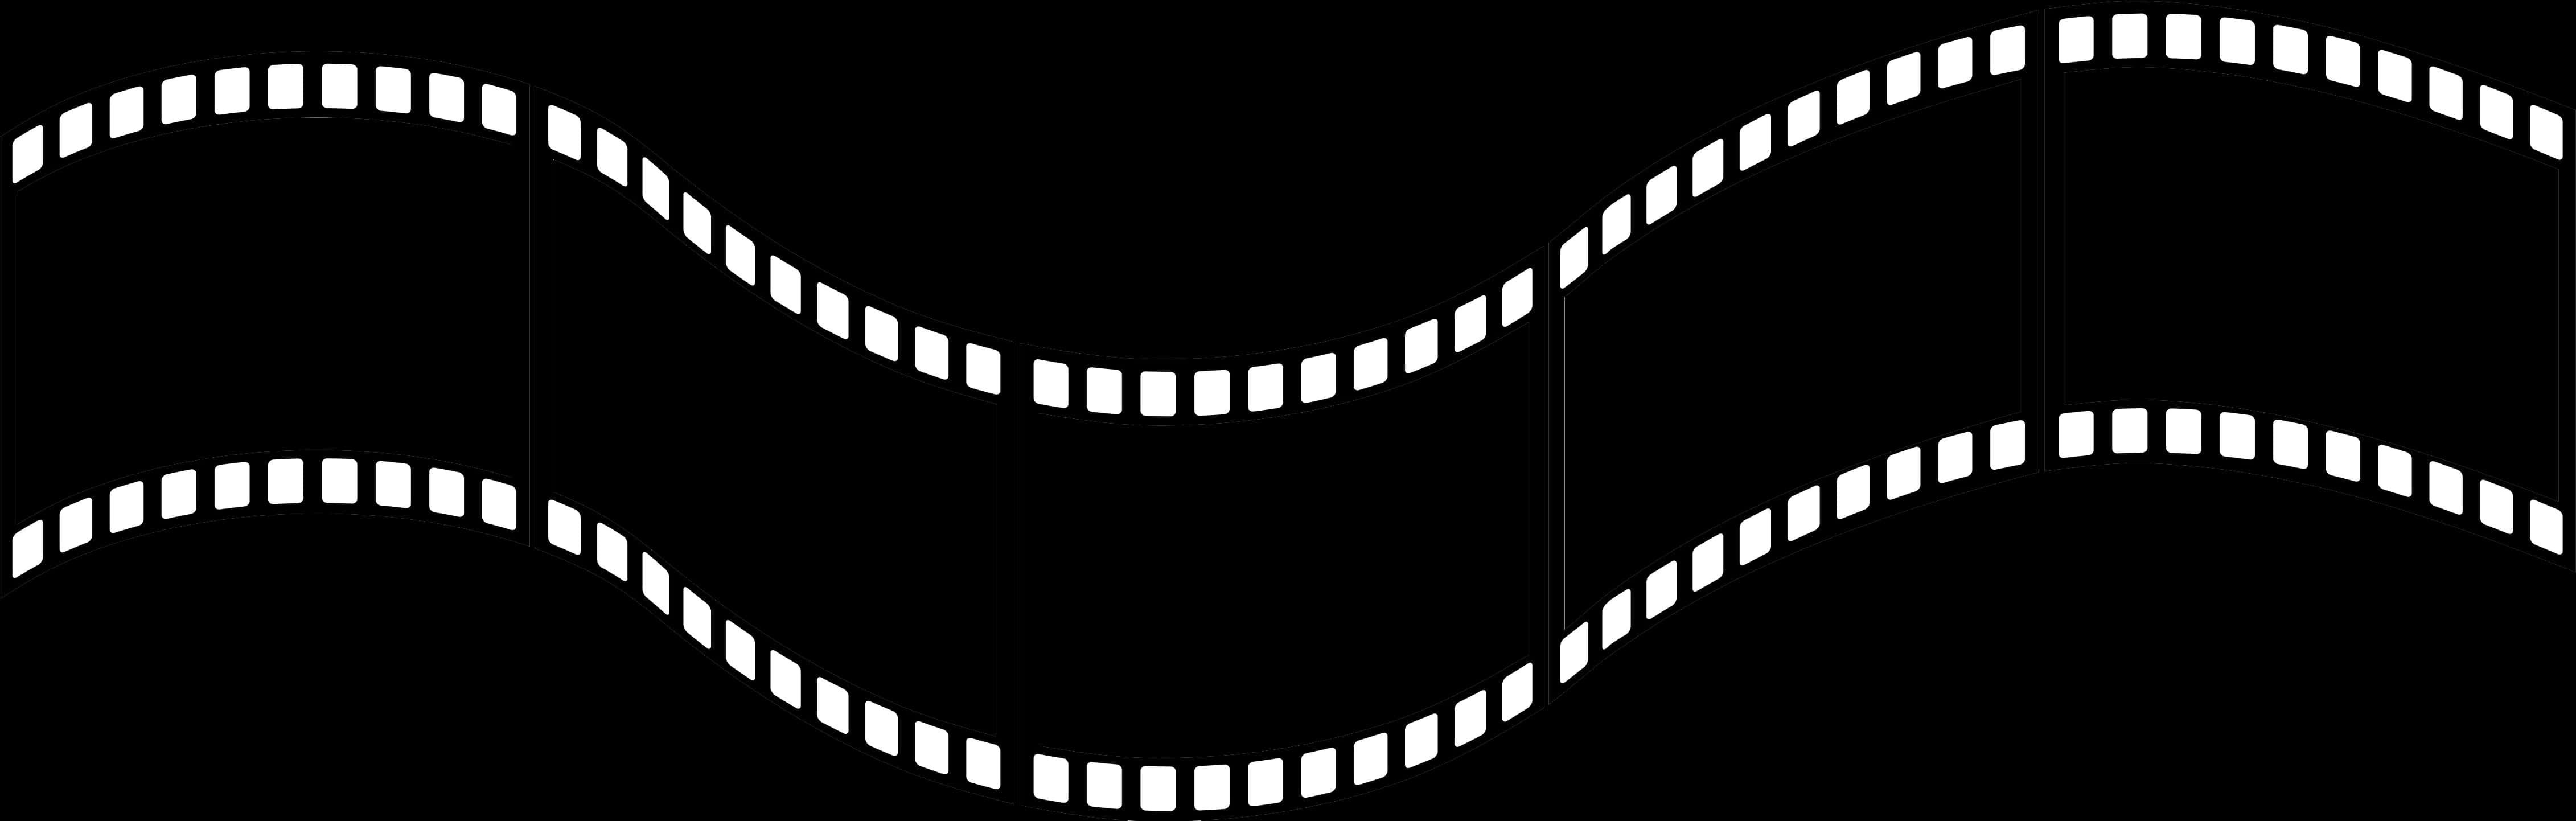 Filmstrip Png Image With - Camera Film Roll Png, Transparent Png